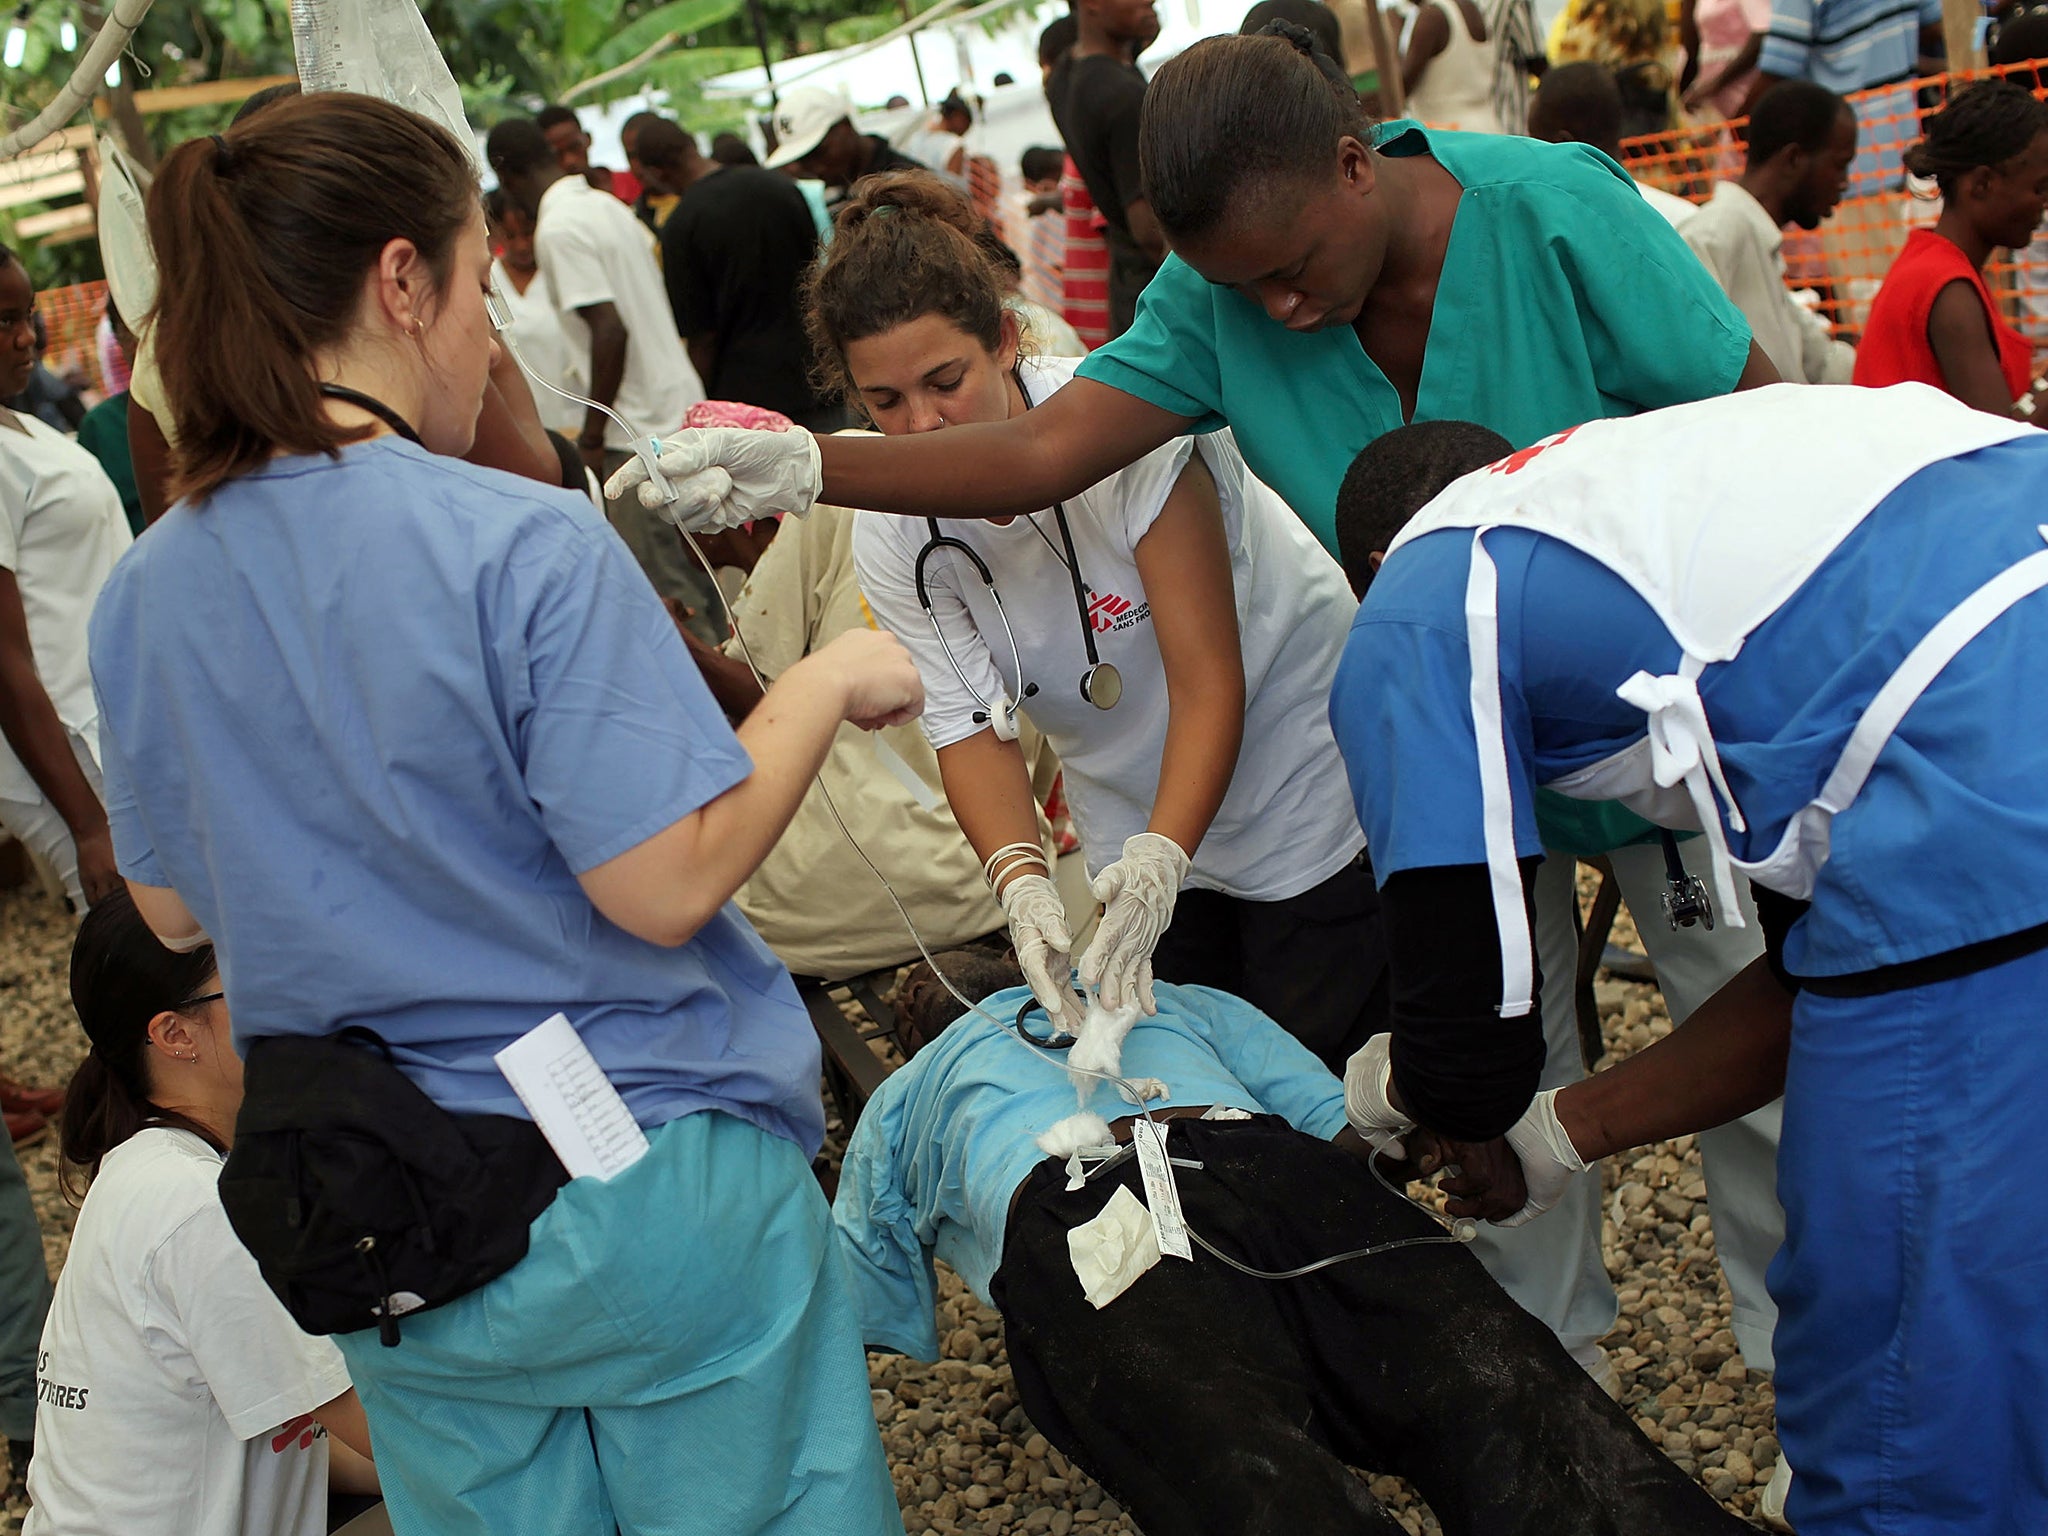 Fight for life: MSF volunteers treat a cholera patient in Haiti in 2010 after an earthquake made a million homeless and disease spread